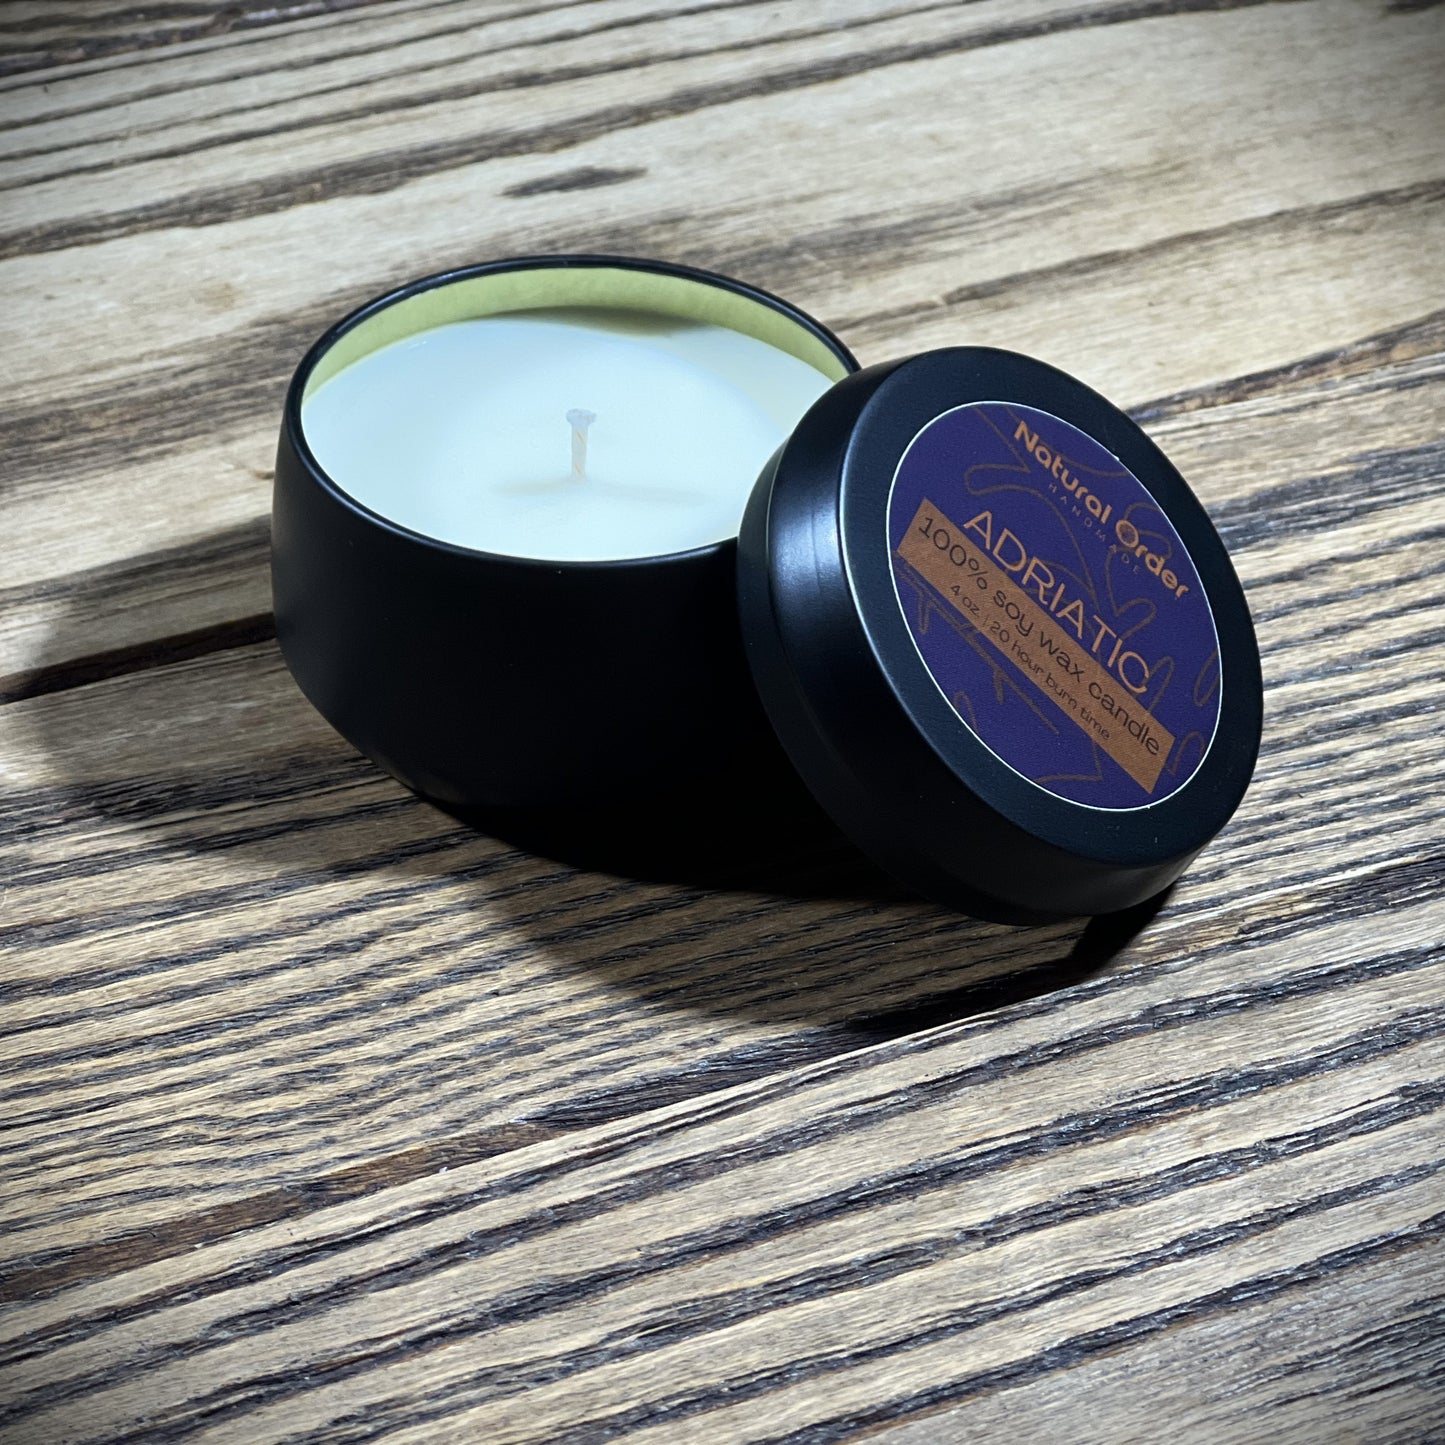 Adriatic Soy Candle 4 ounce